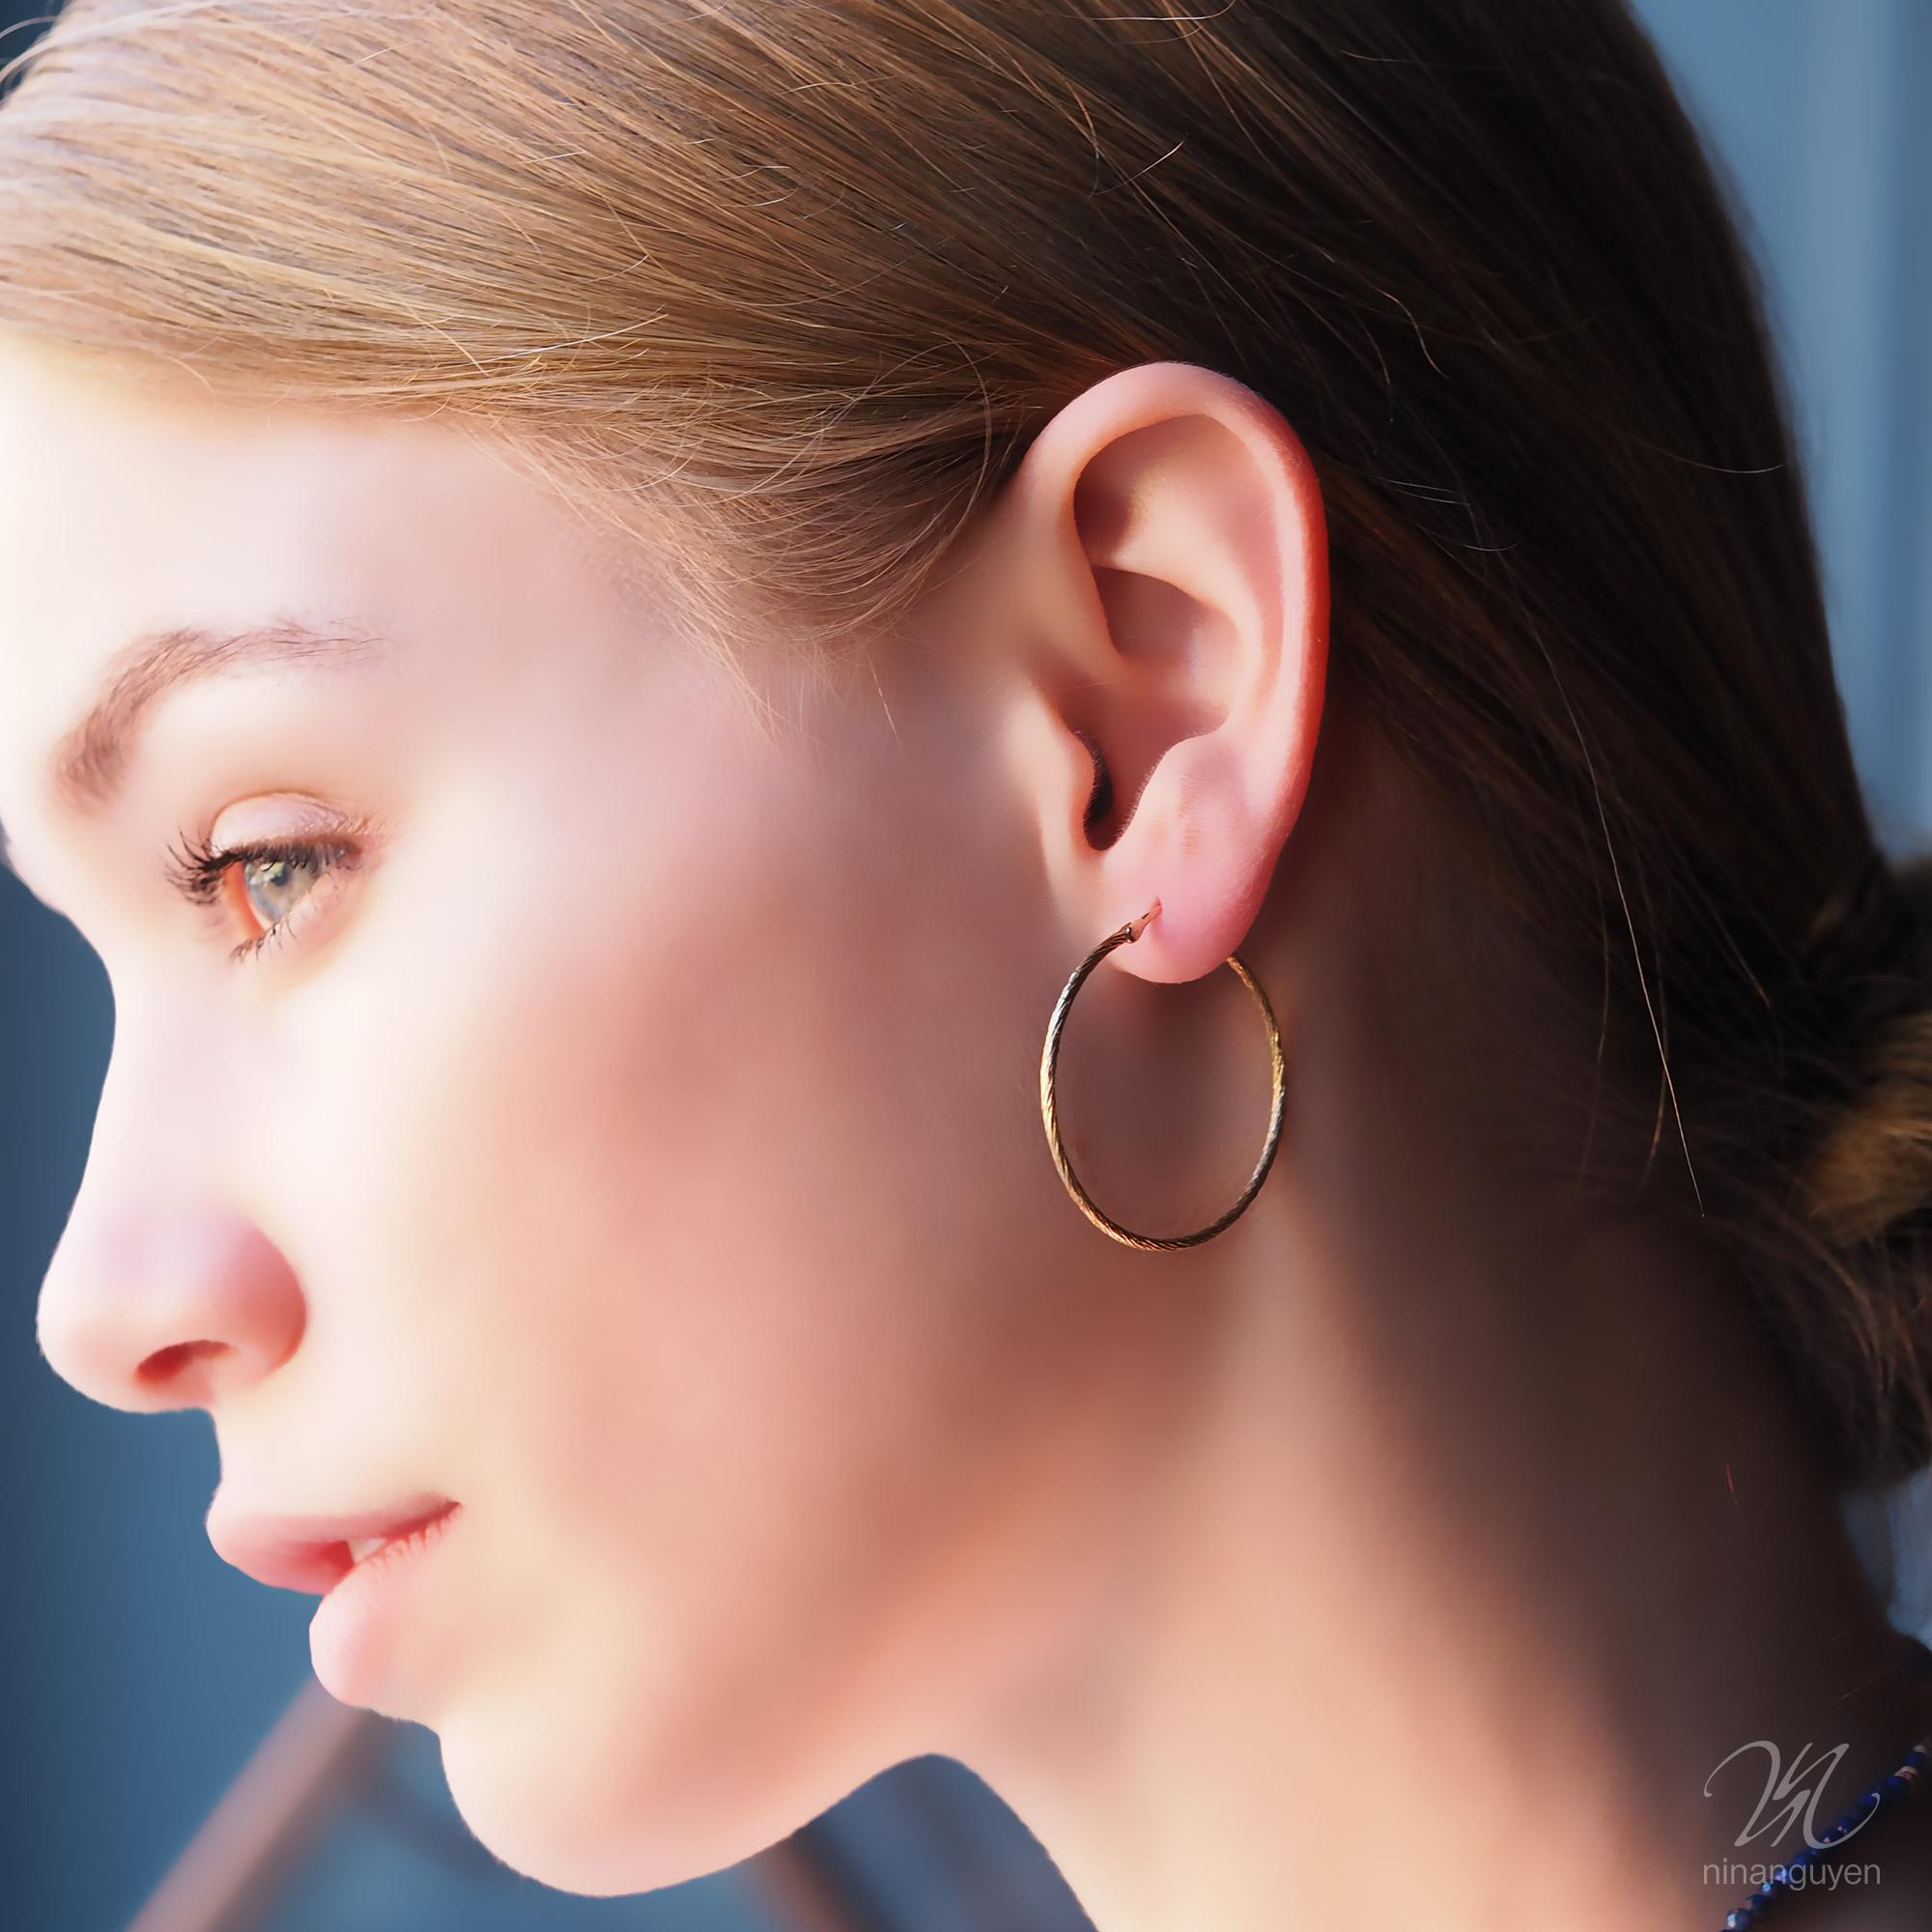 These textured Medium 30mm Gold Hoops are made for dangling a custom-curated batch of your favorite jackets but go ahead and wear them on their own if you want to. They’ll get attention either way. 

Size: 30mm